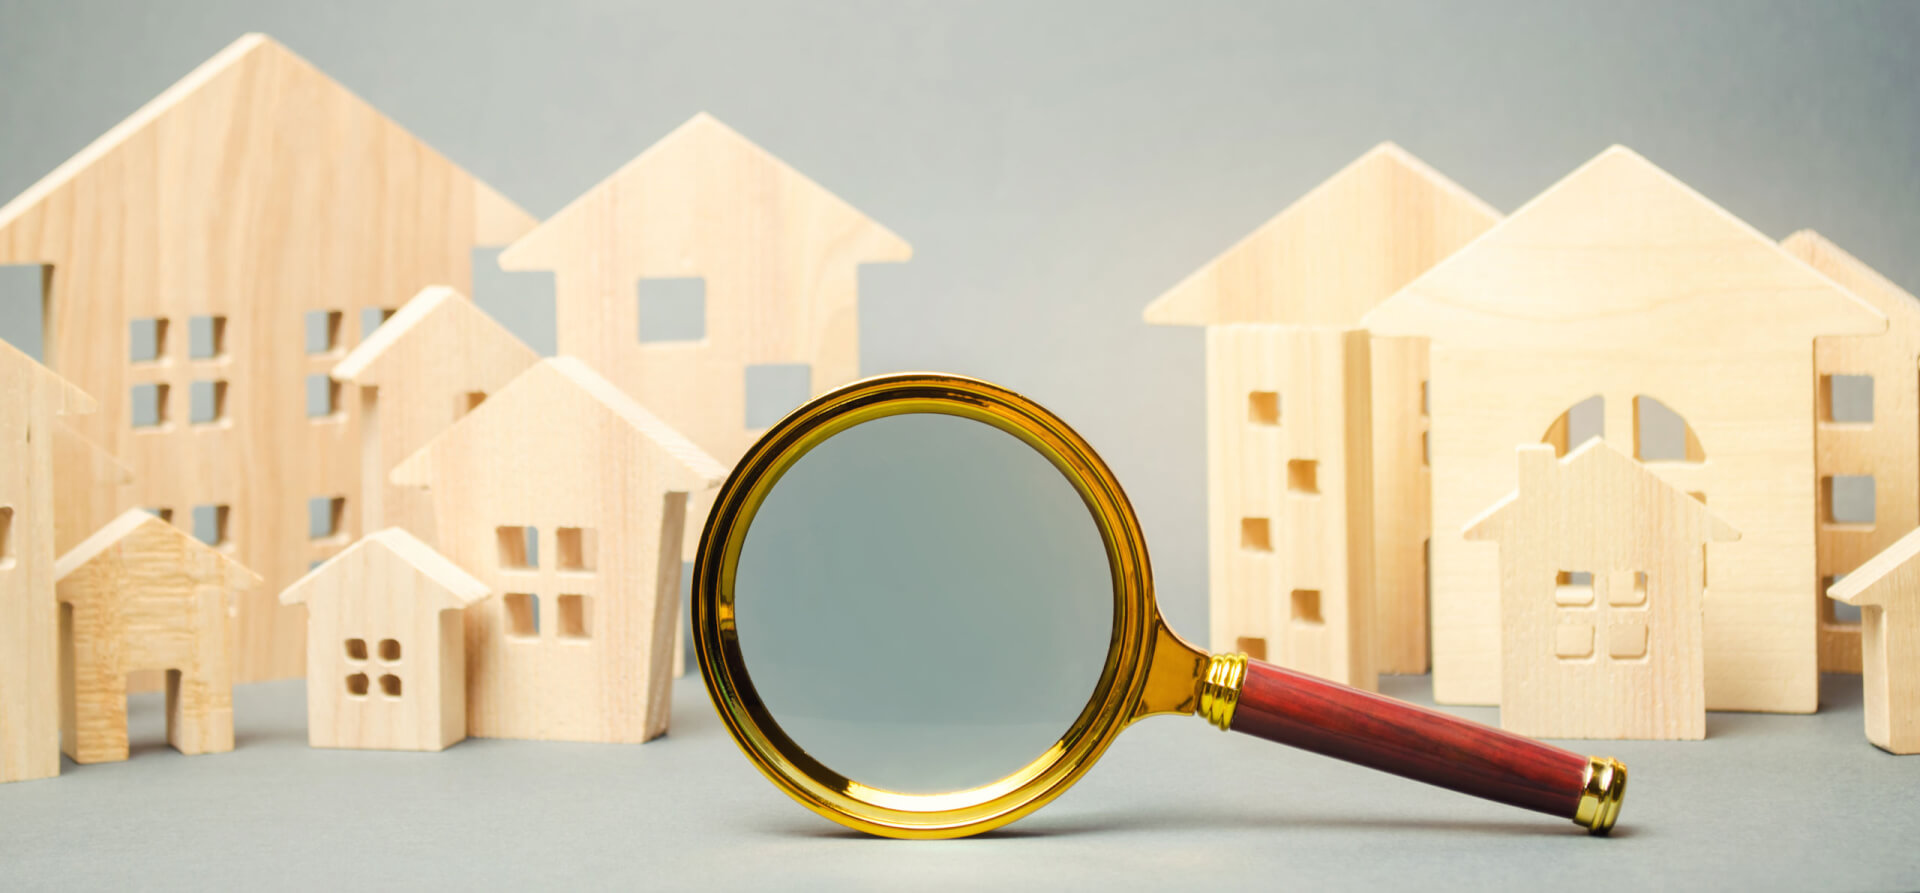 Magnifying glass and wooden houses.